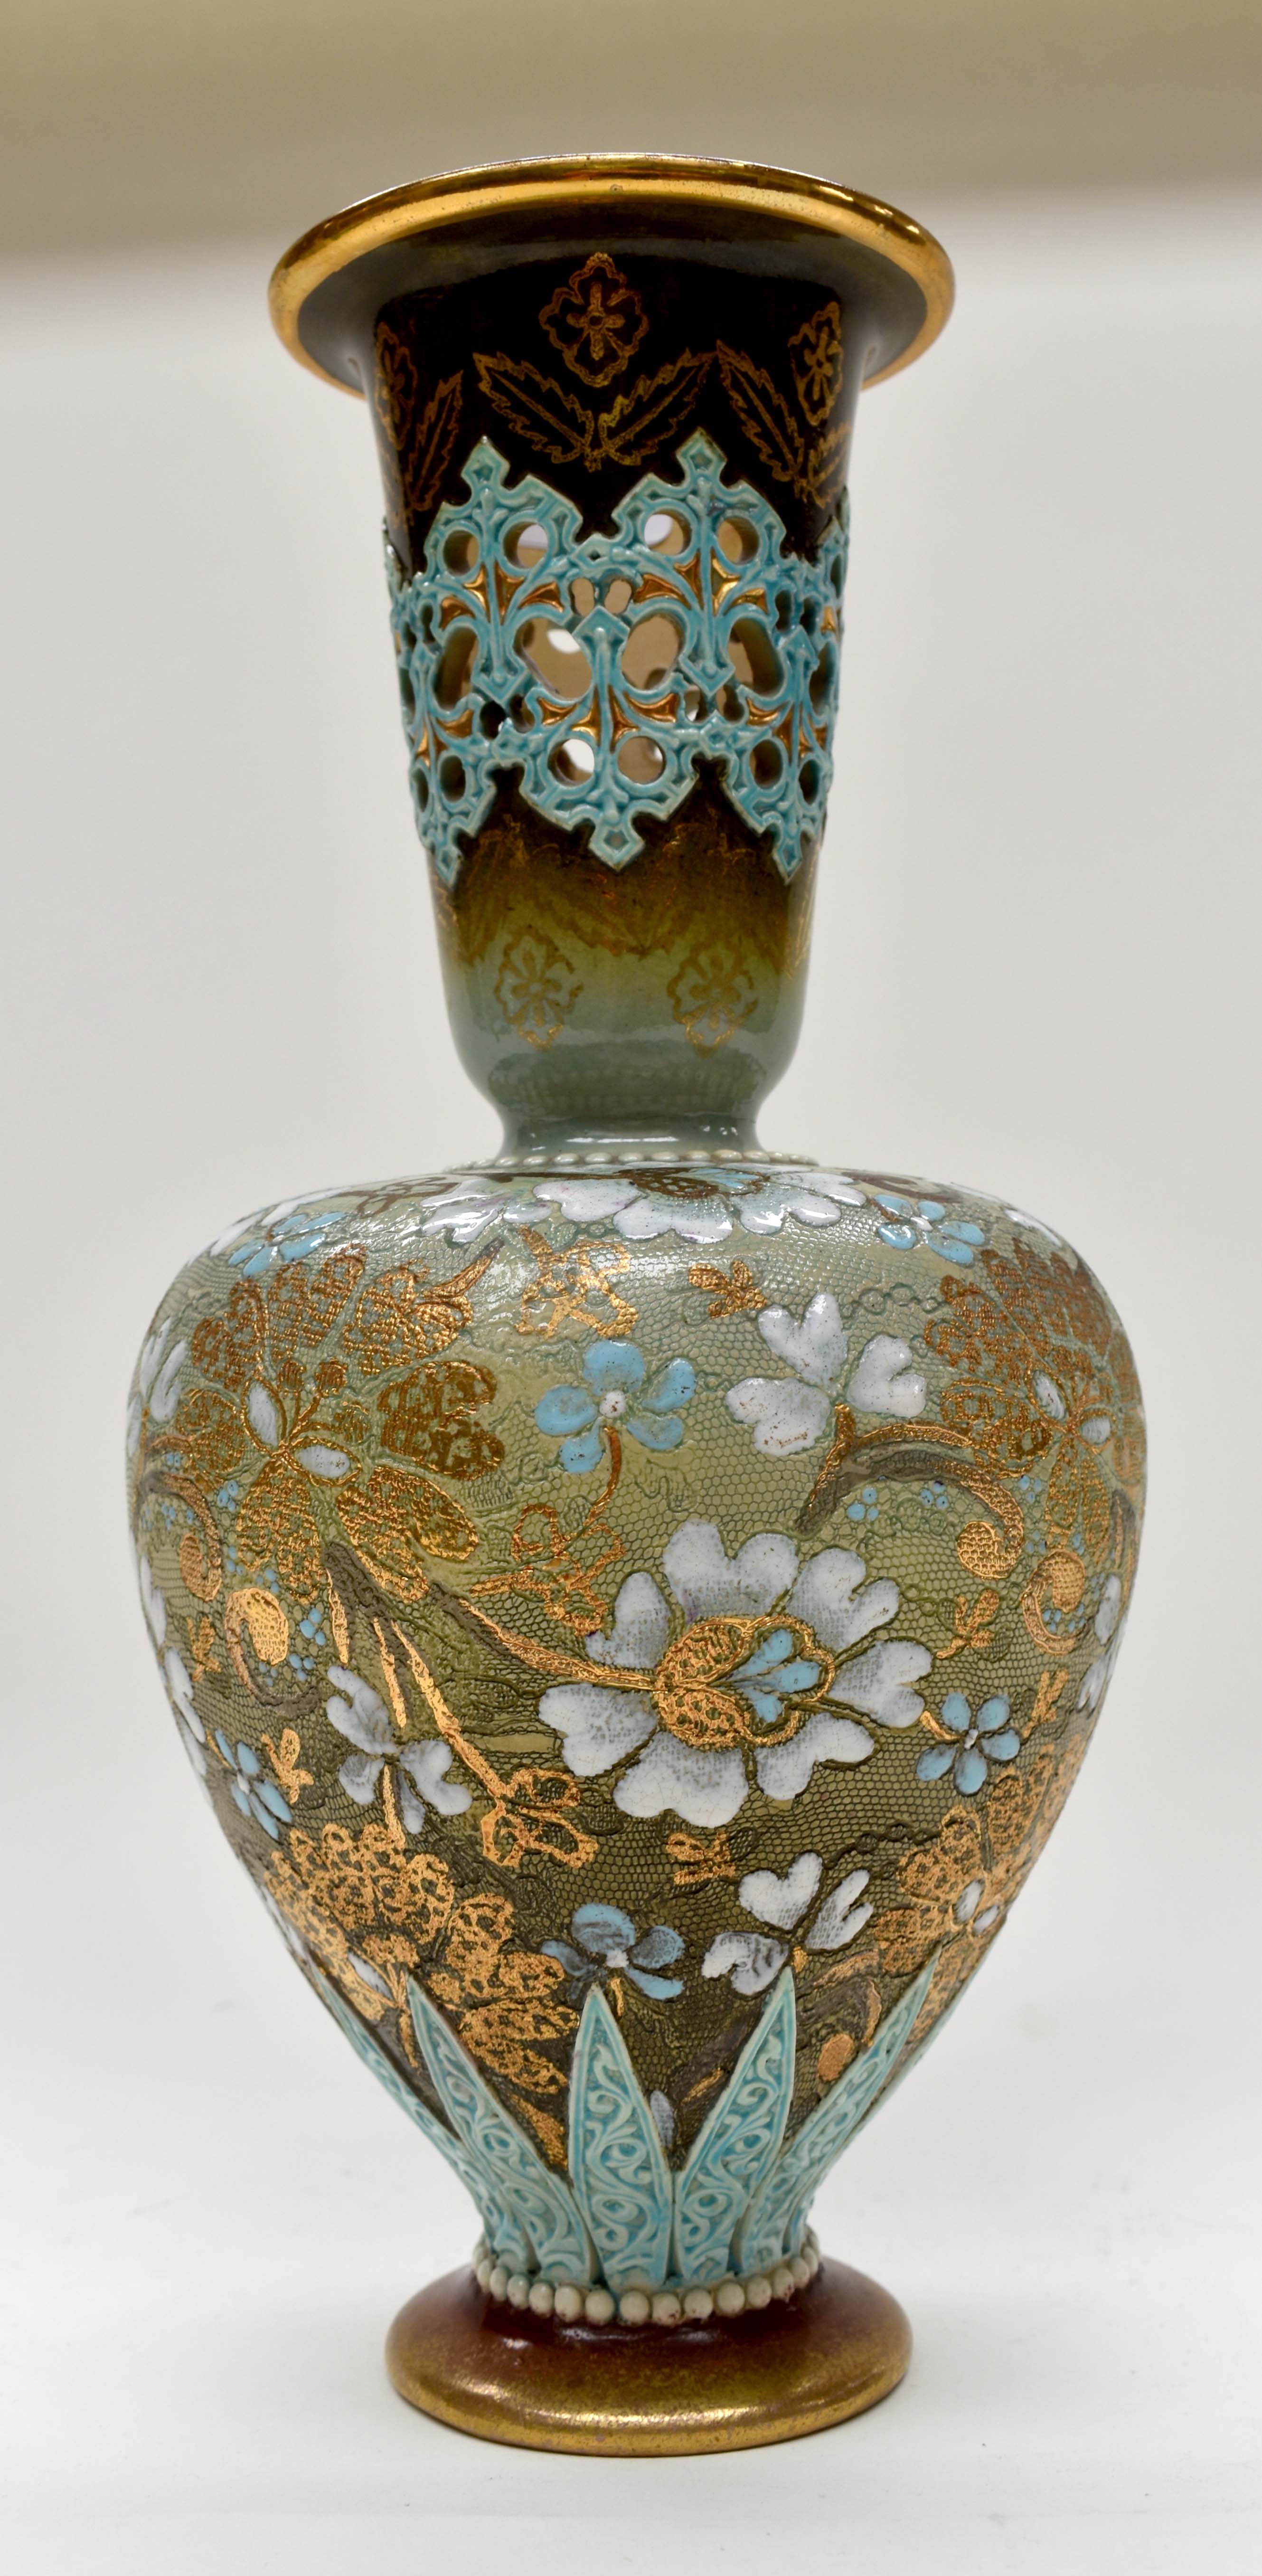 A Royal Doulton Salters Patent vase with reticulated neck